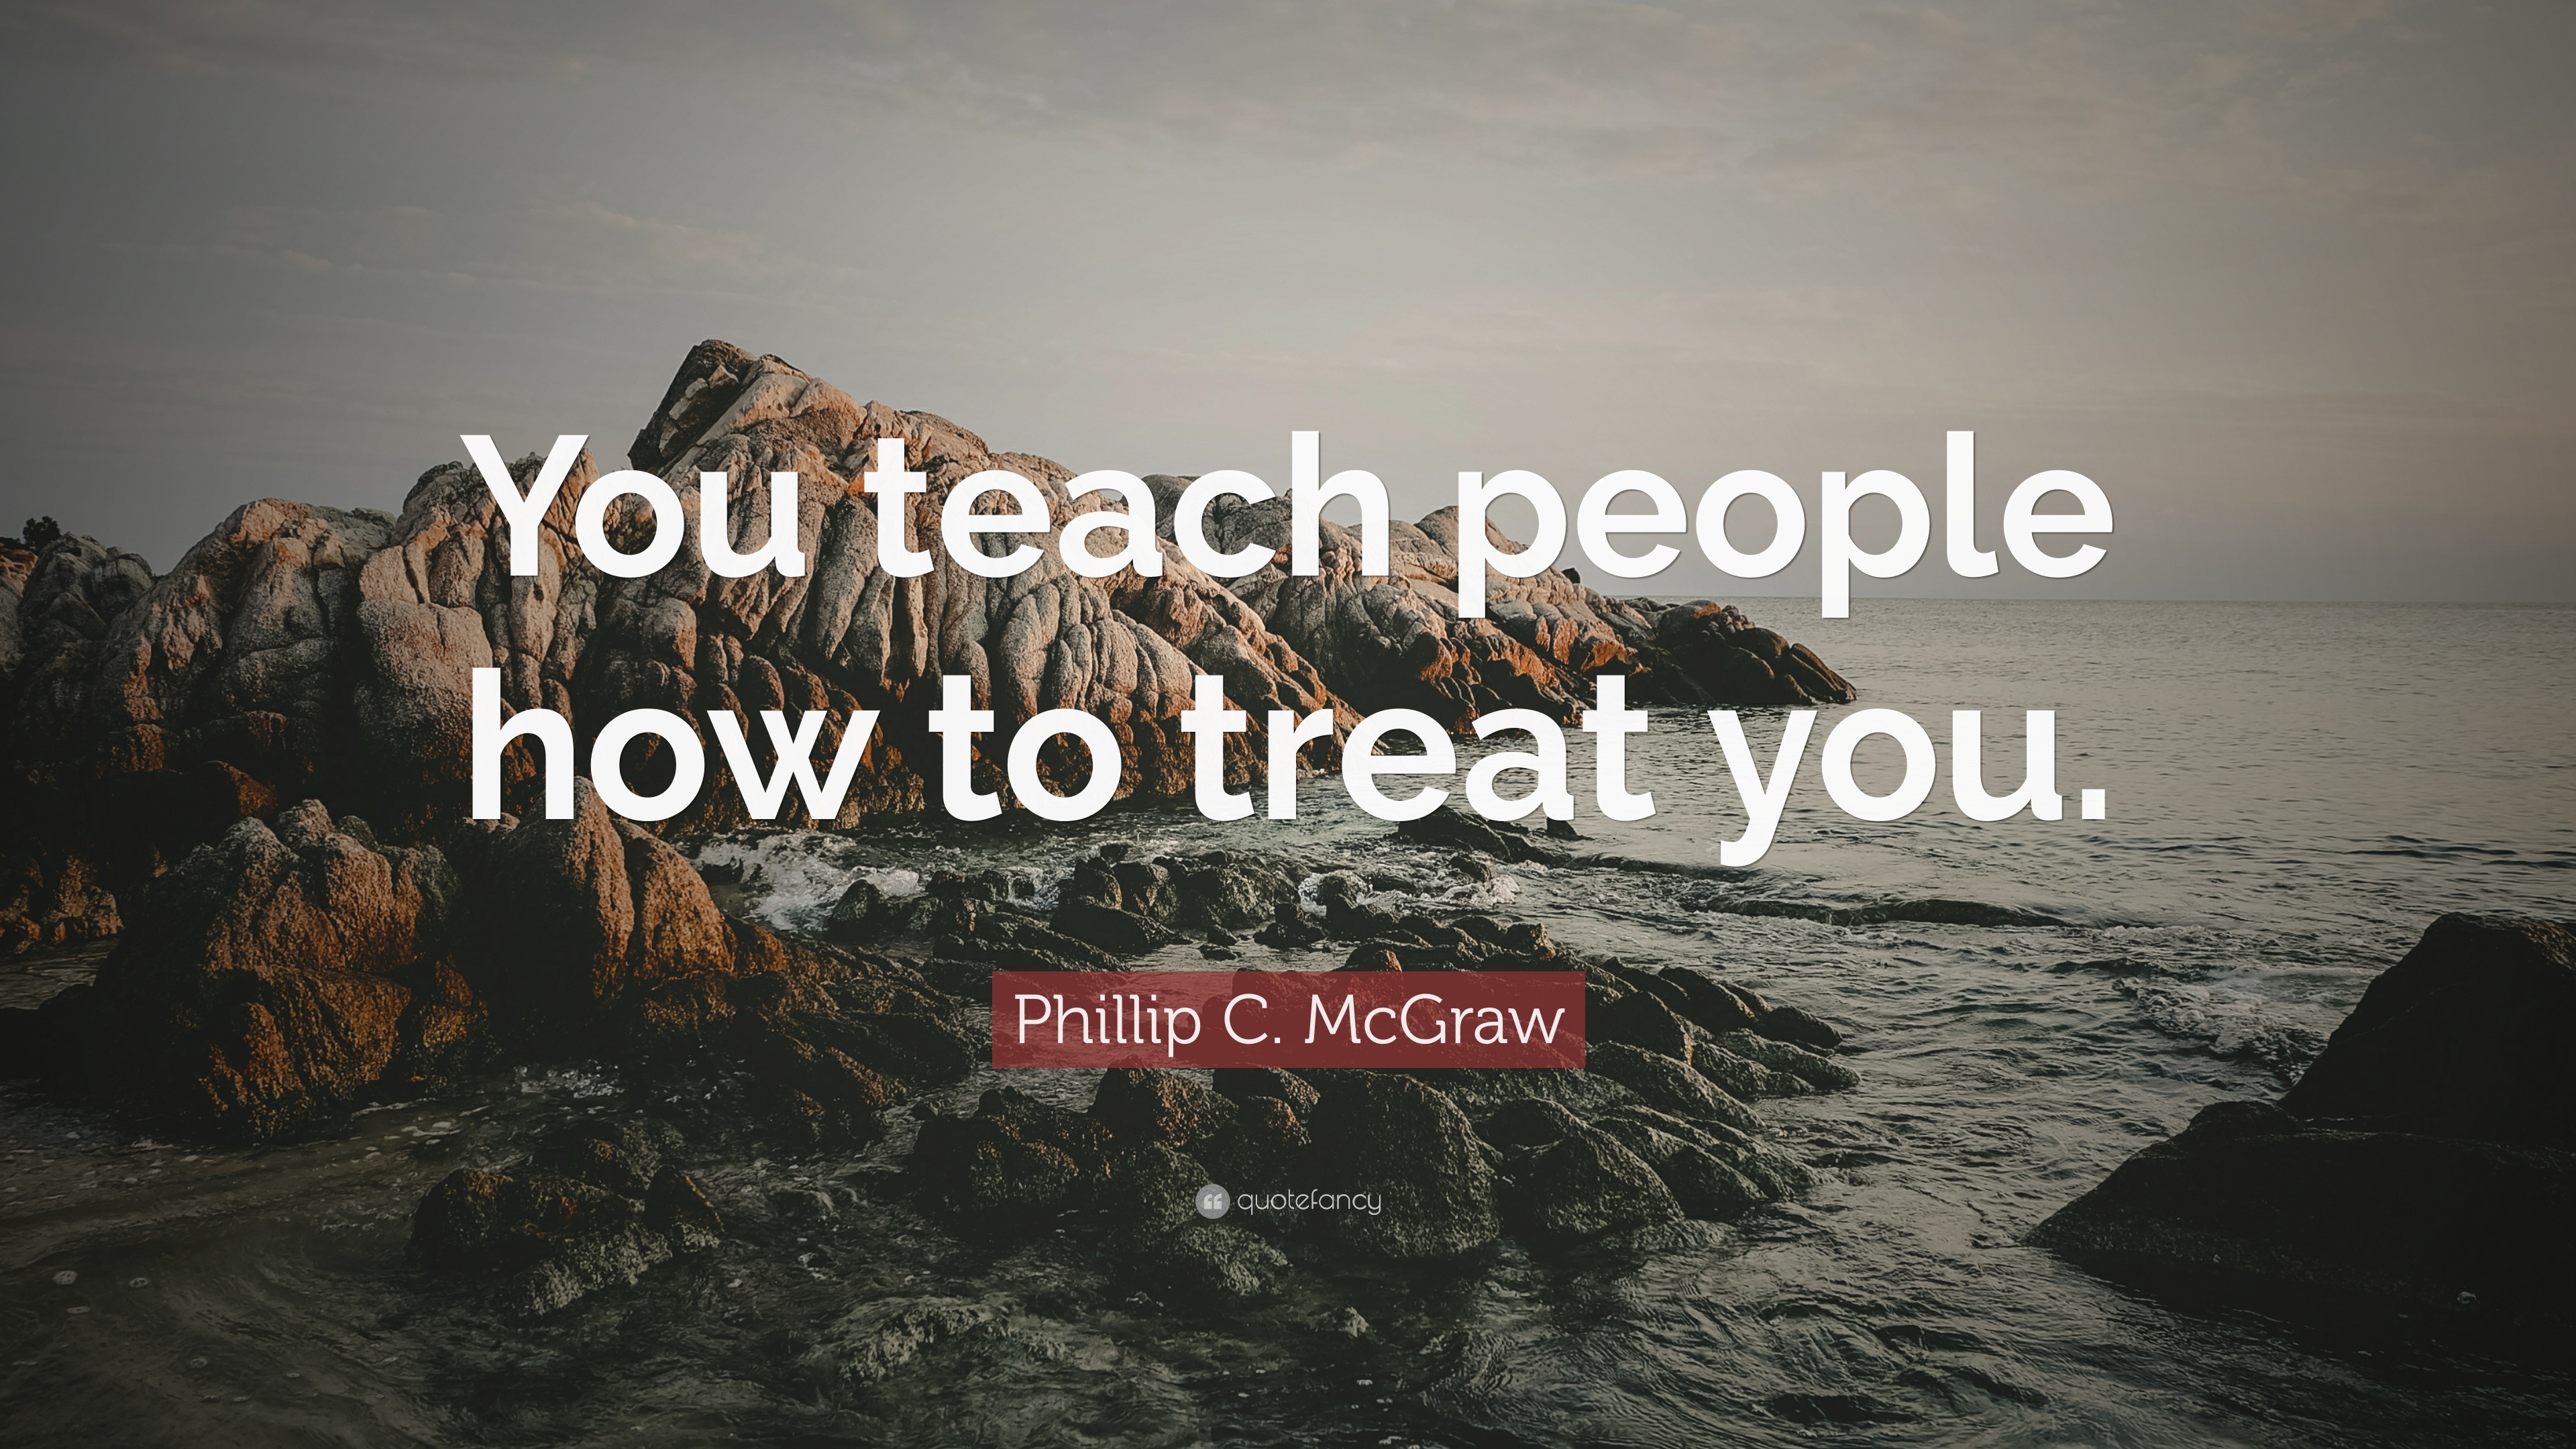 Phillip C. McGraw Quote: "You teach people how to treat you."